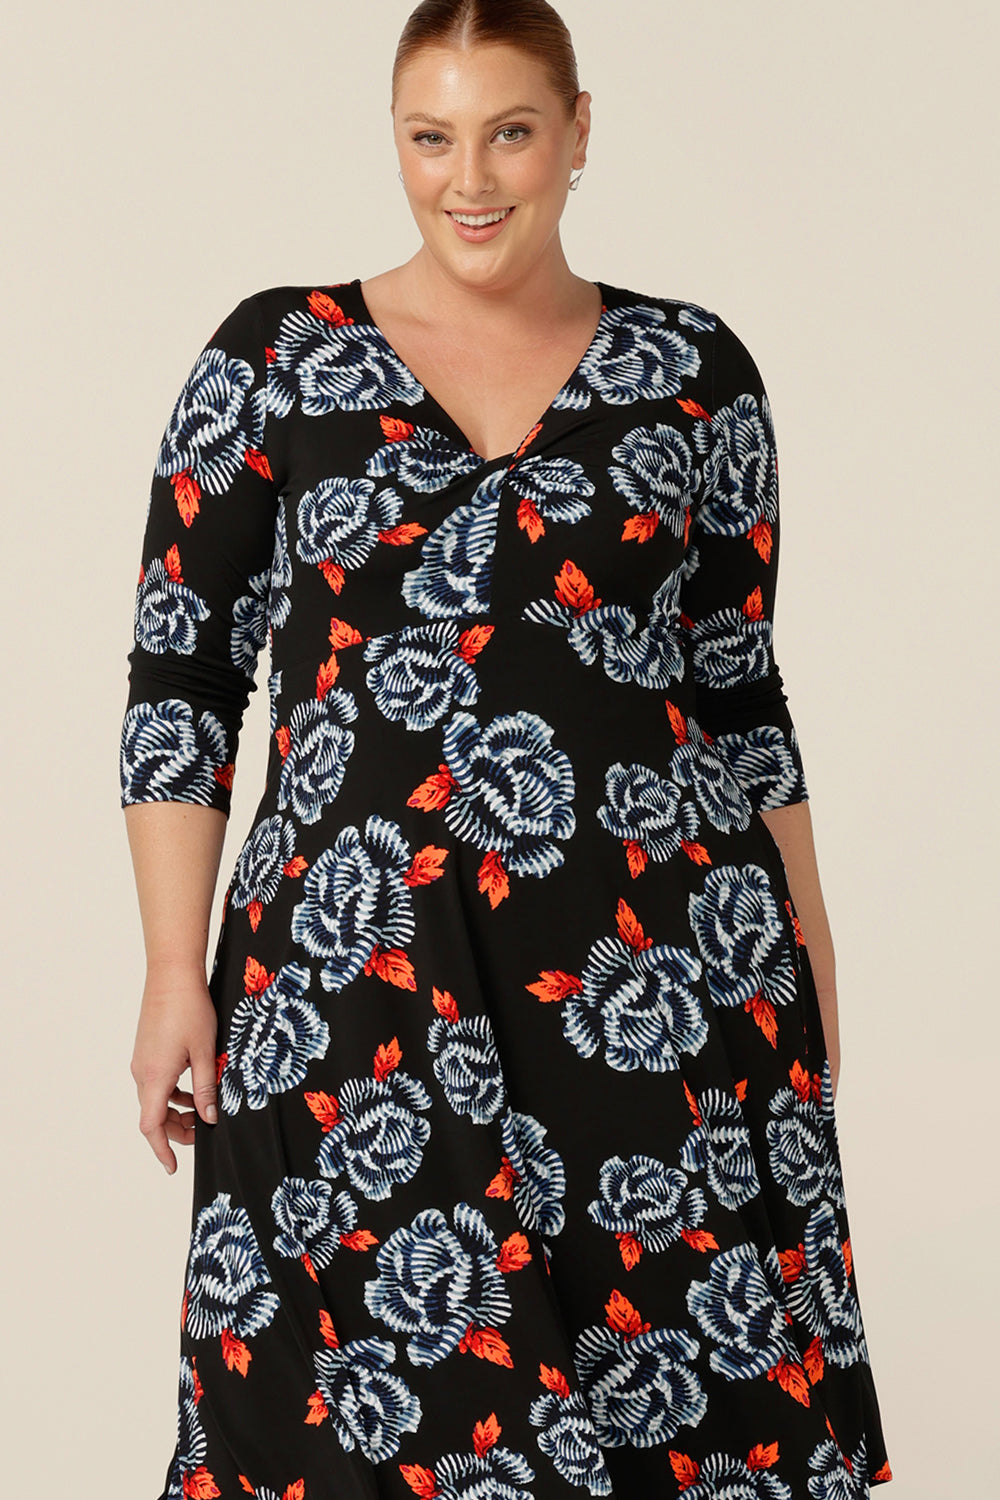 Close up detail of twist front, empire line jersey dress by Australian and New Zealand women's clothing label, L&F. In a size 18, a woman wears a blue and orange floral print jersey dress by Australian and New Zealand women's clothing brand, L&F. this empire line dress features a V-neckline with twist detail, 3/4 sleeves and a full below-the-knee-length skirt. Australian-made, shop L&F workwear dresses in sizes 8 to size 24.